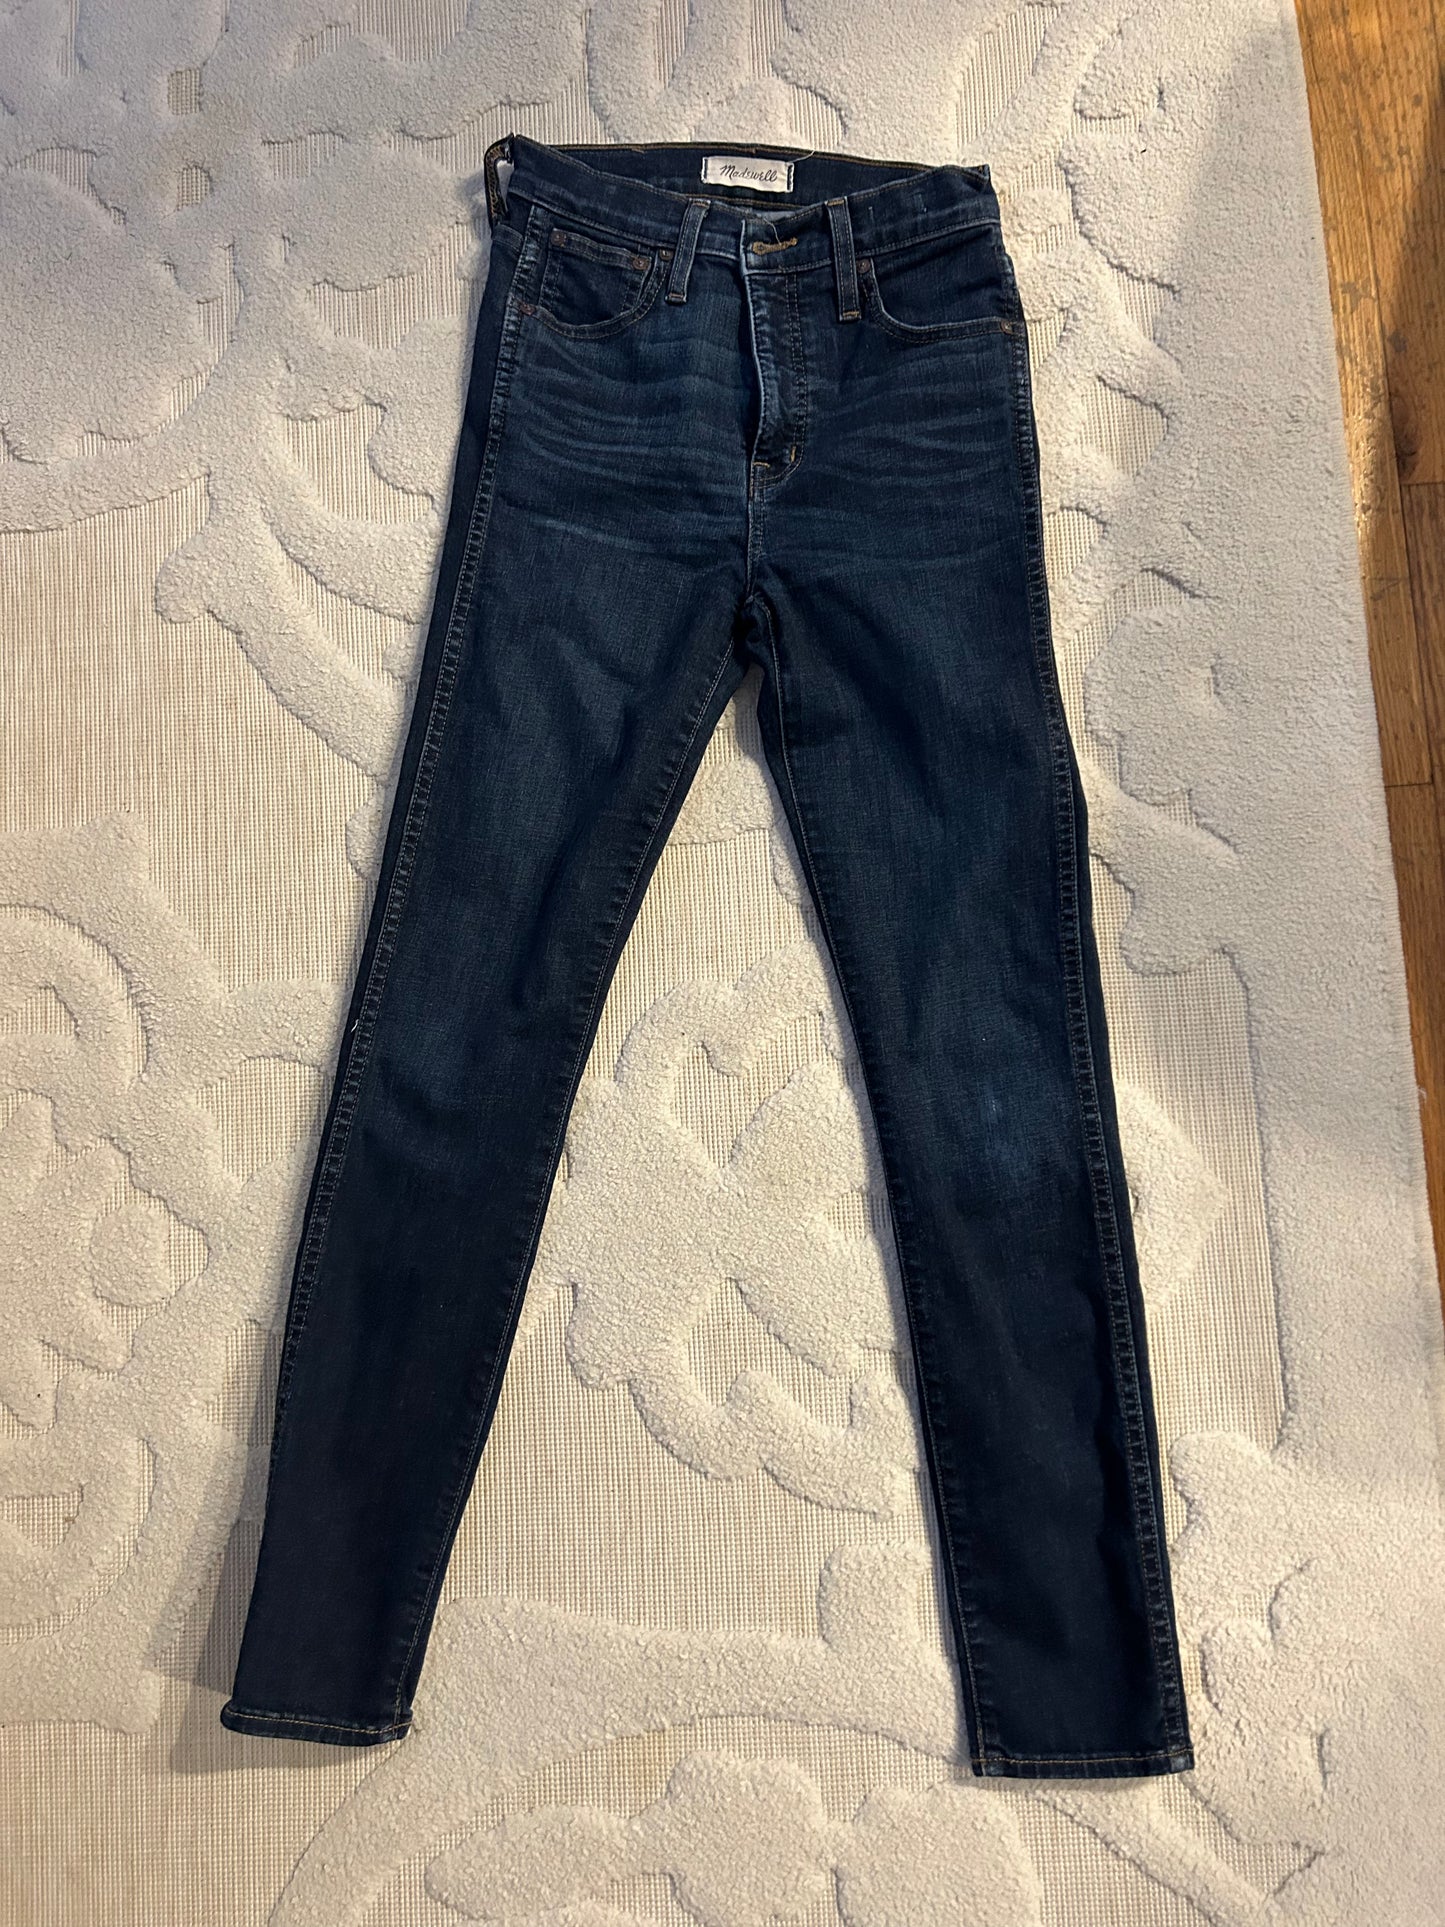 Madewell 10 inch high rise skinny jean Size 25